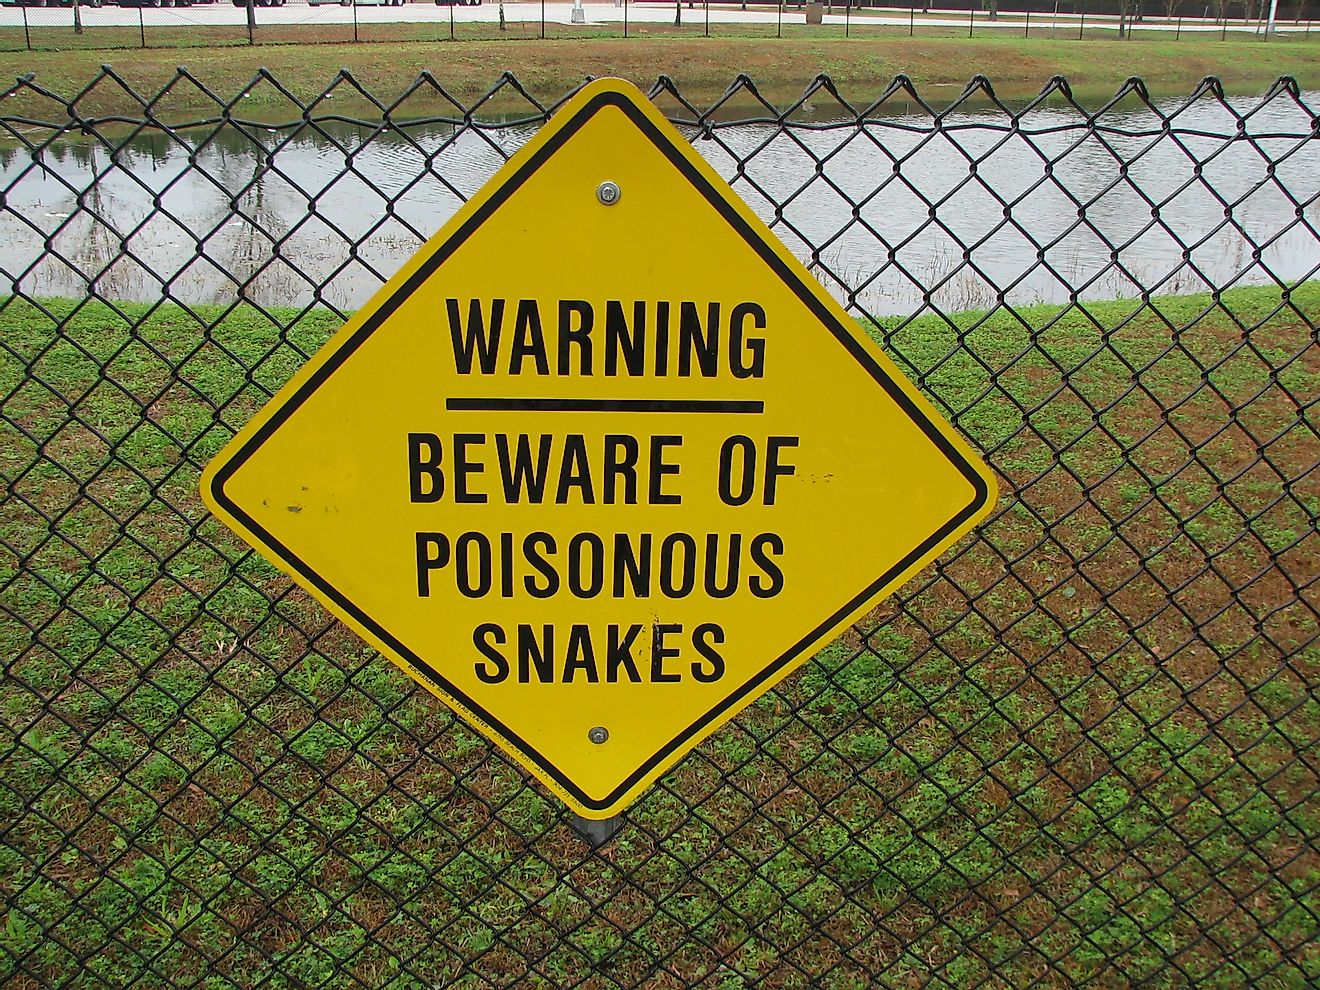 Warning sign by JamieS93, CC BY-SA 3.0 <https://creativecommons.org/licenses/by-sa/3.0. via Wikimedia Commons